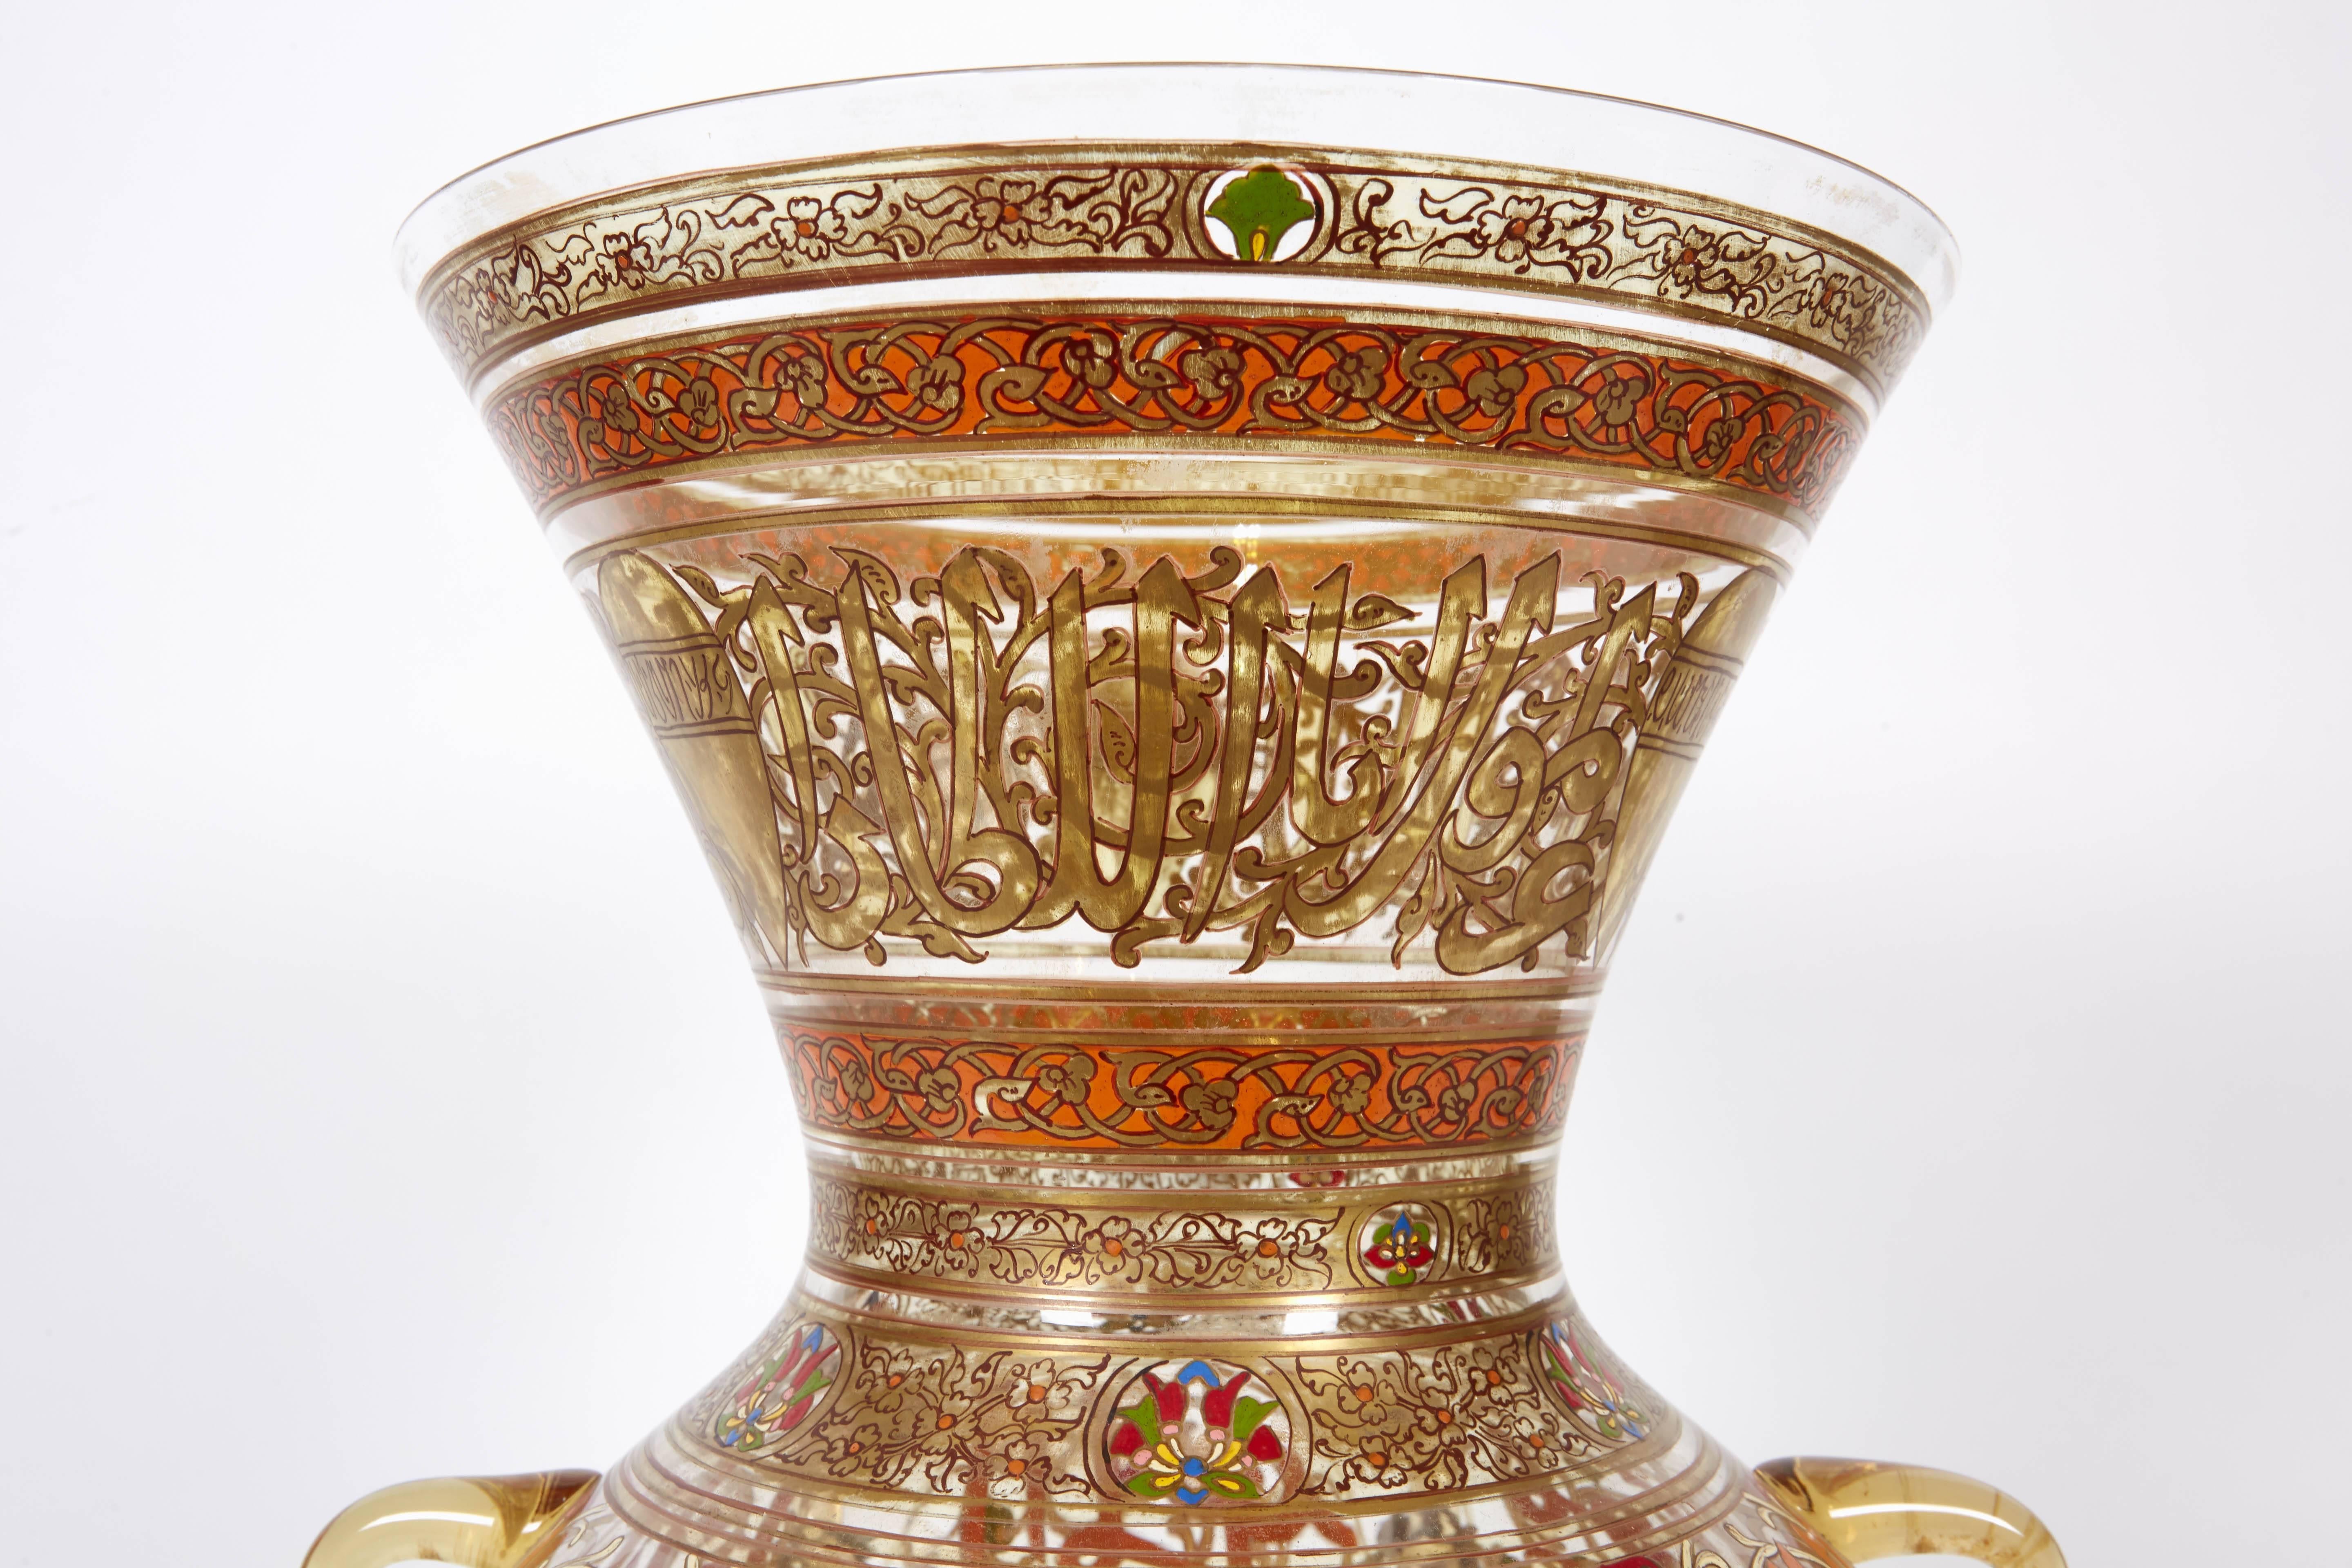 Rare French Enameled Mamluk Revival Glass Mosque Lamp by Philippe Joseph Brocard For Sale 4